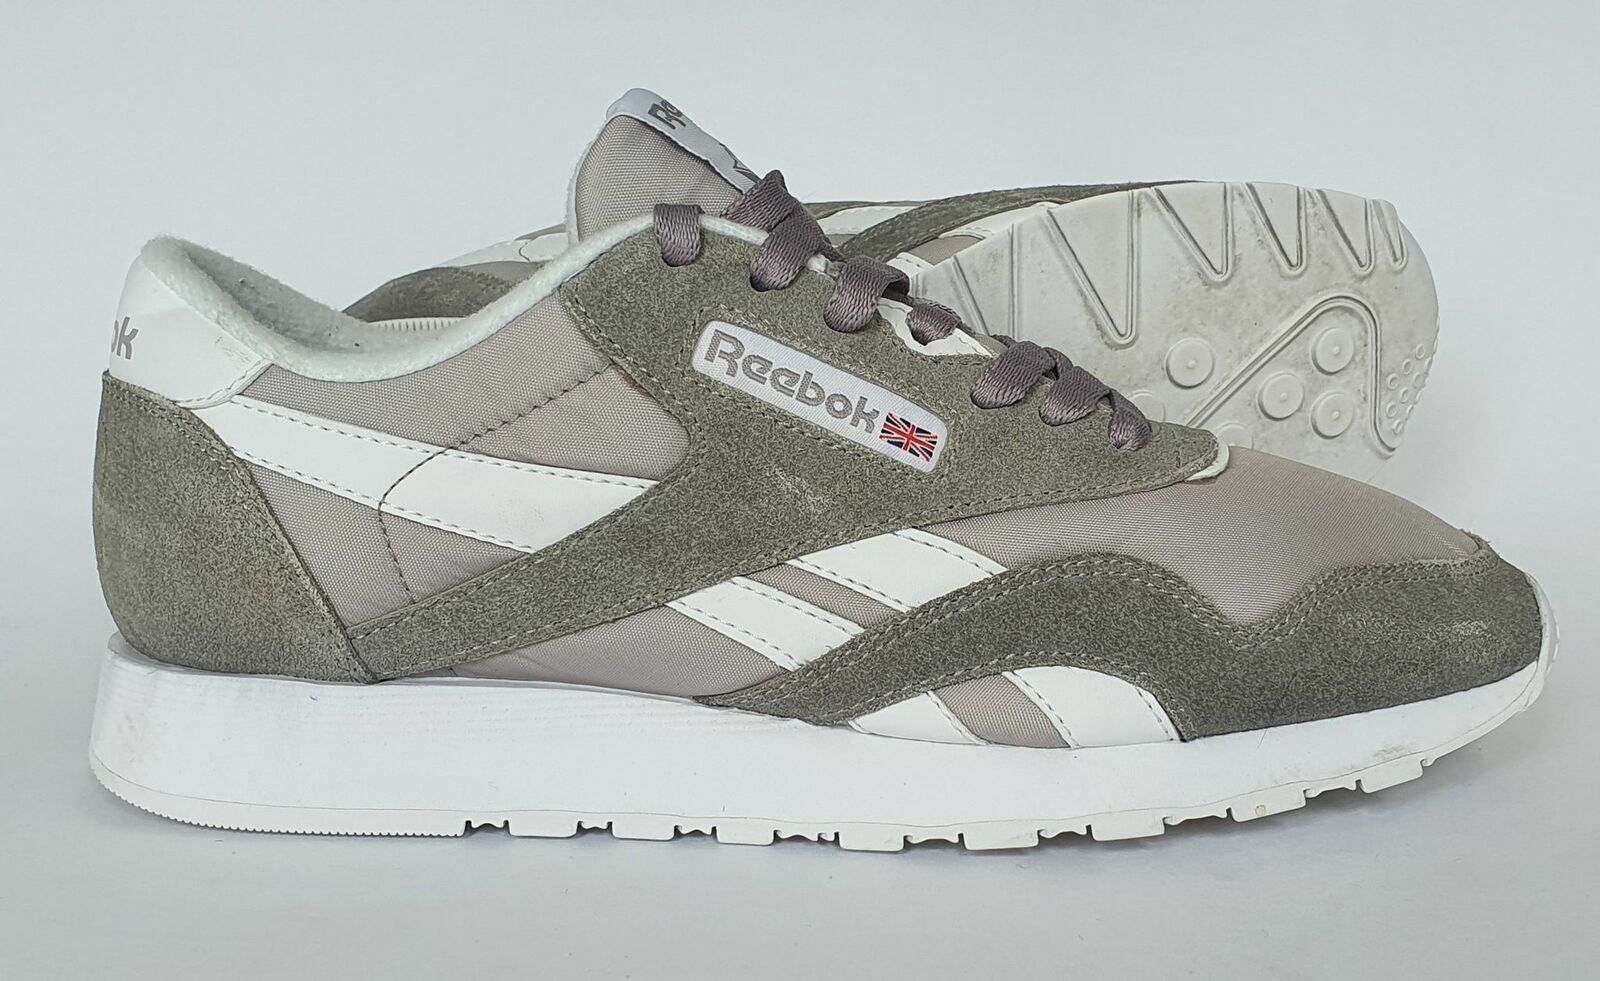 reebok classic nylon trainers in white and grey